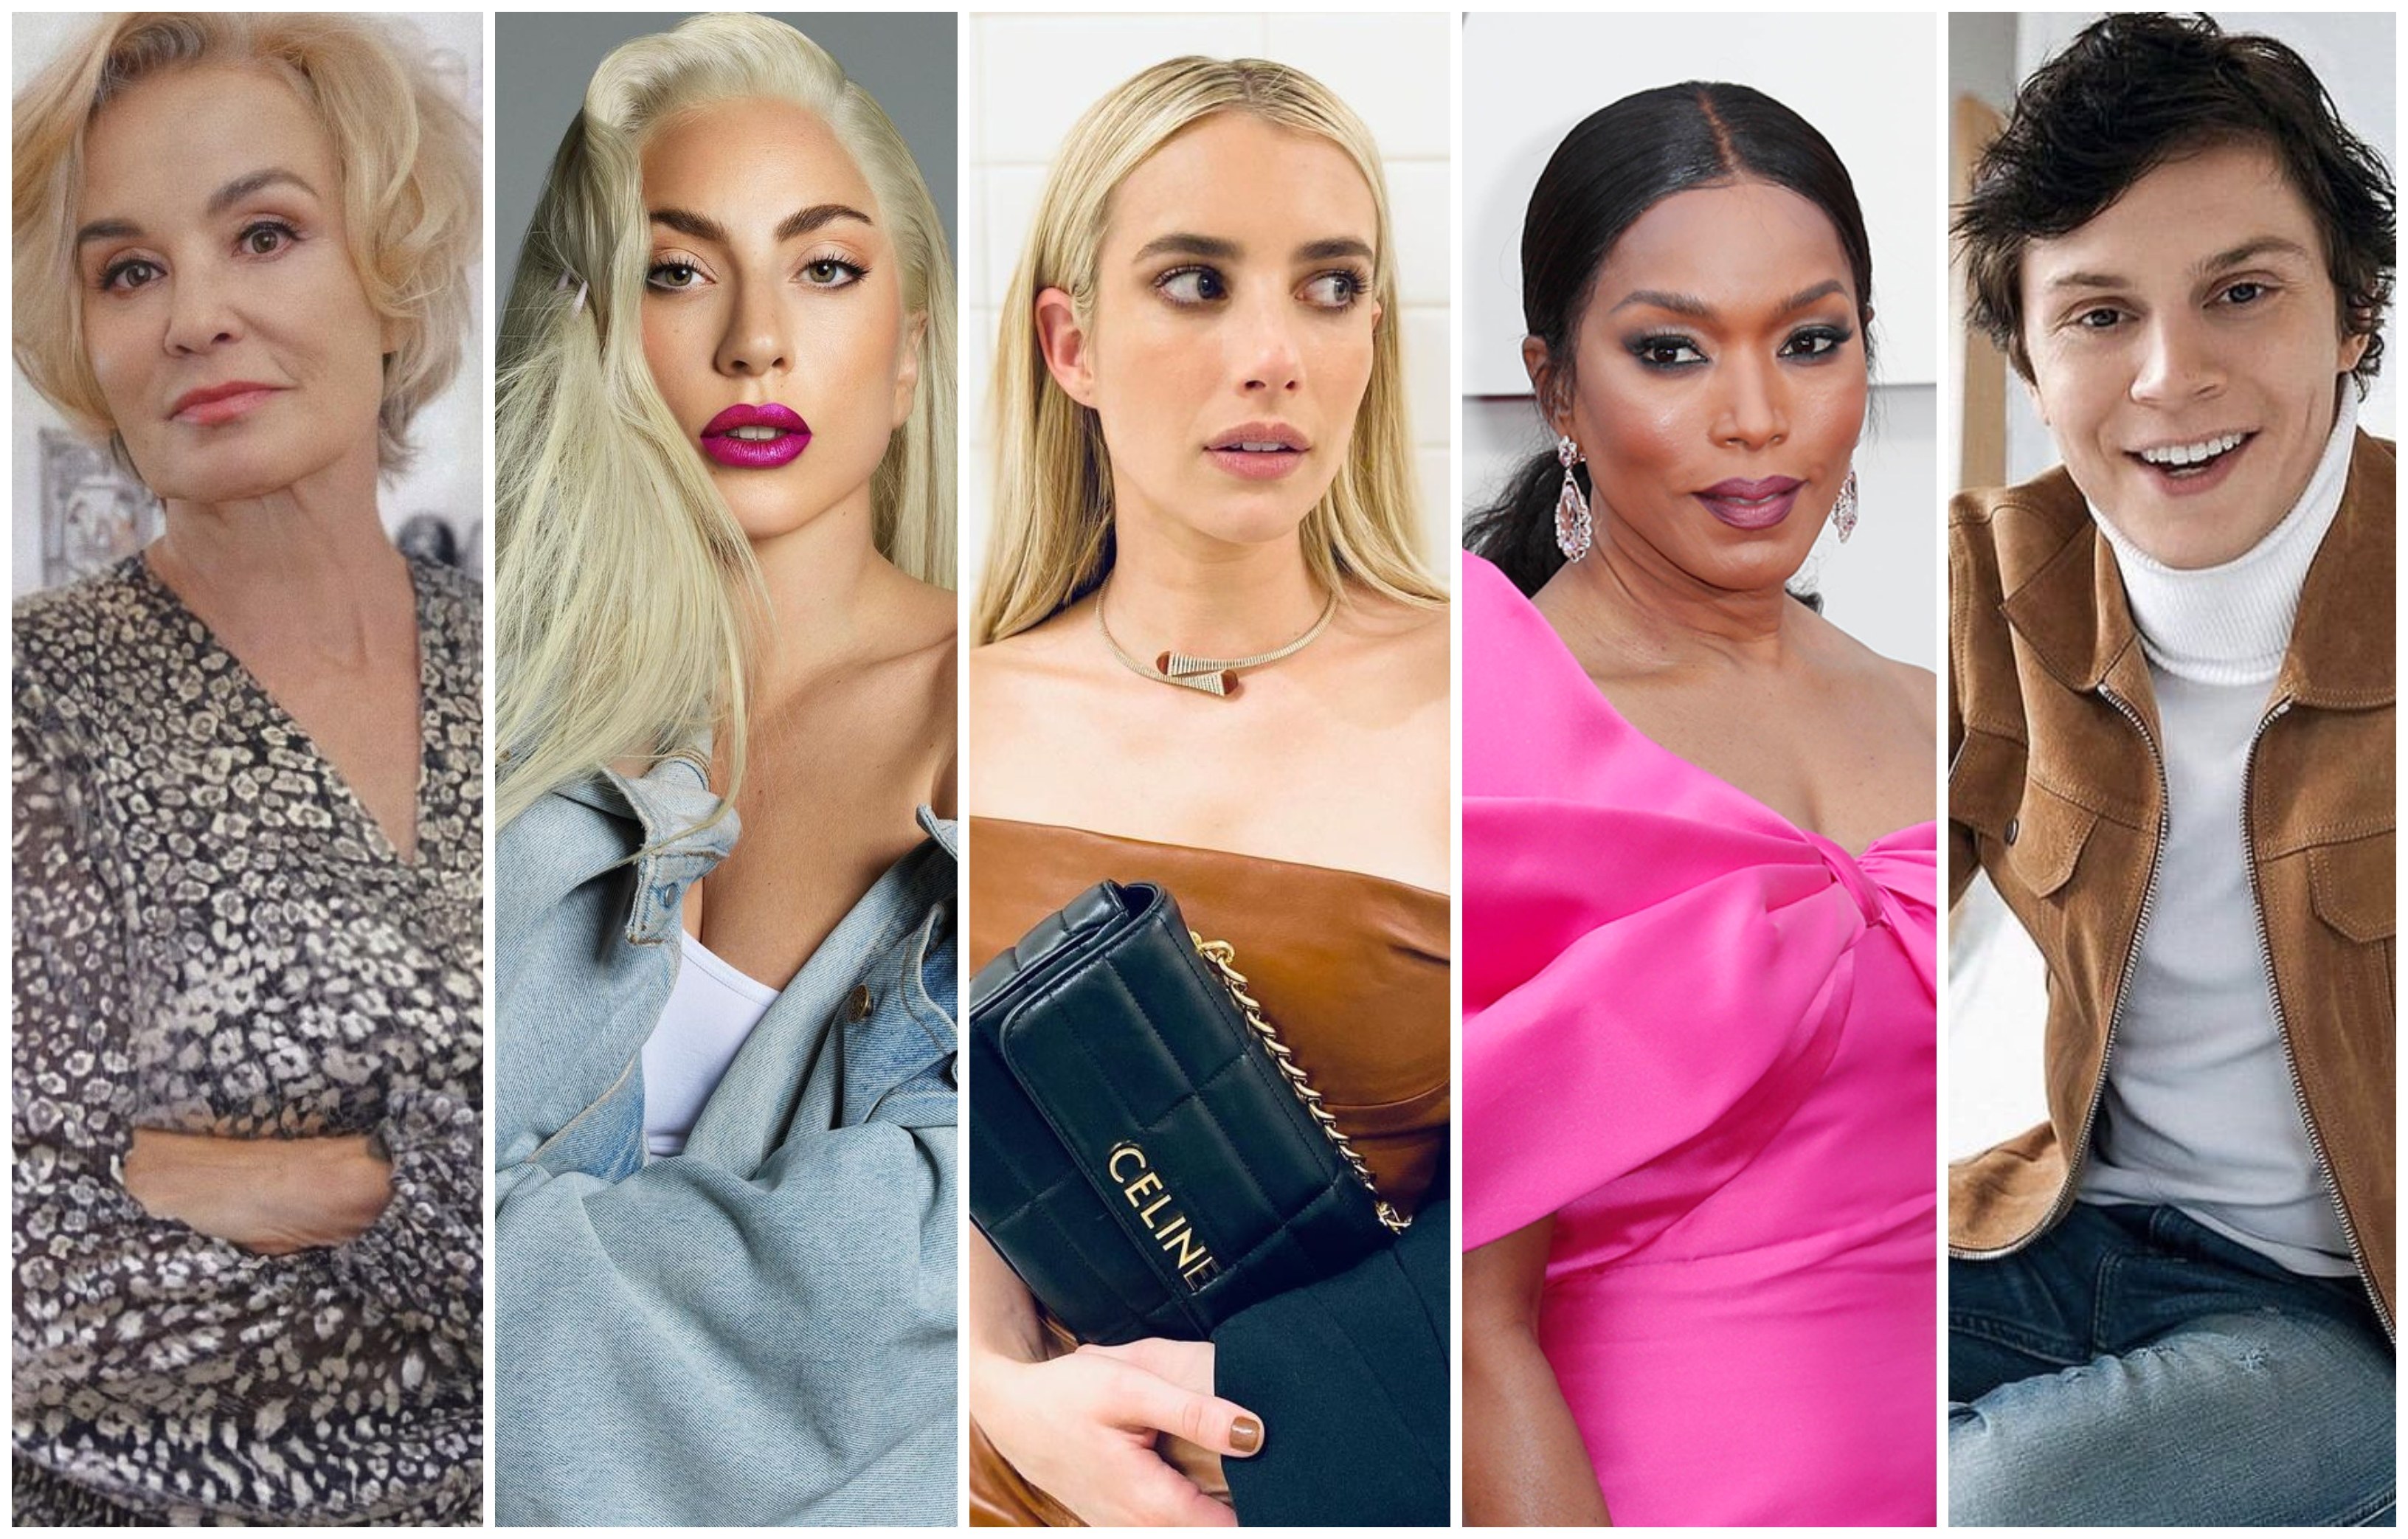 American Horror Story’s richest cast members, revealed, including Jessica Lange, Lady Gaga, Emma Roberts, Angela Bassett and Evan Peters. Photos: Getty Images, @jessicalangeph, @ladygaga, @emmaroberts, @evenpetes/Instagram